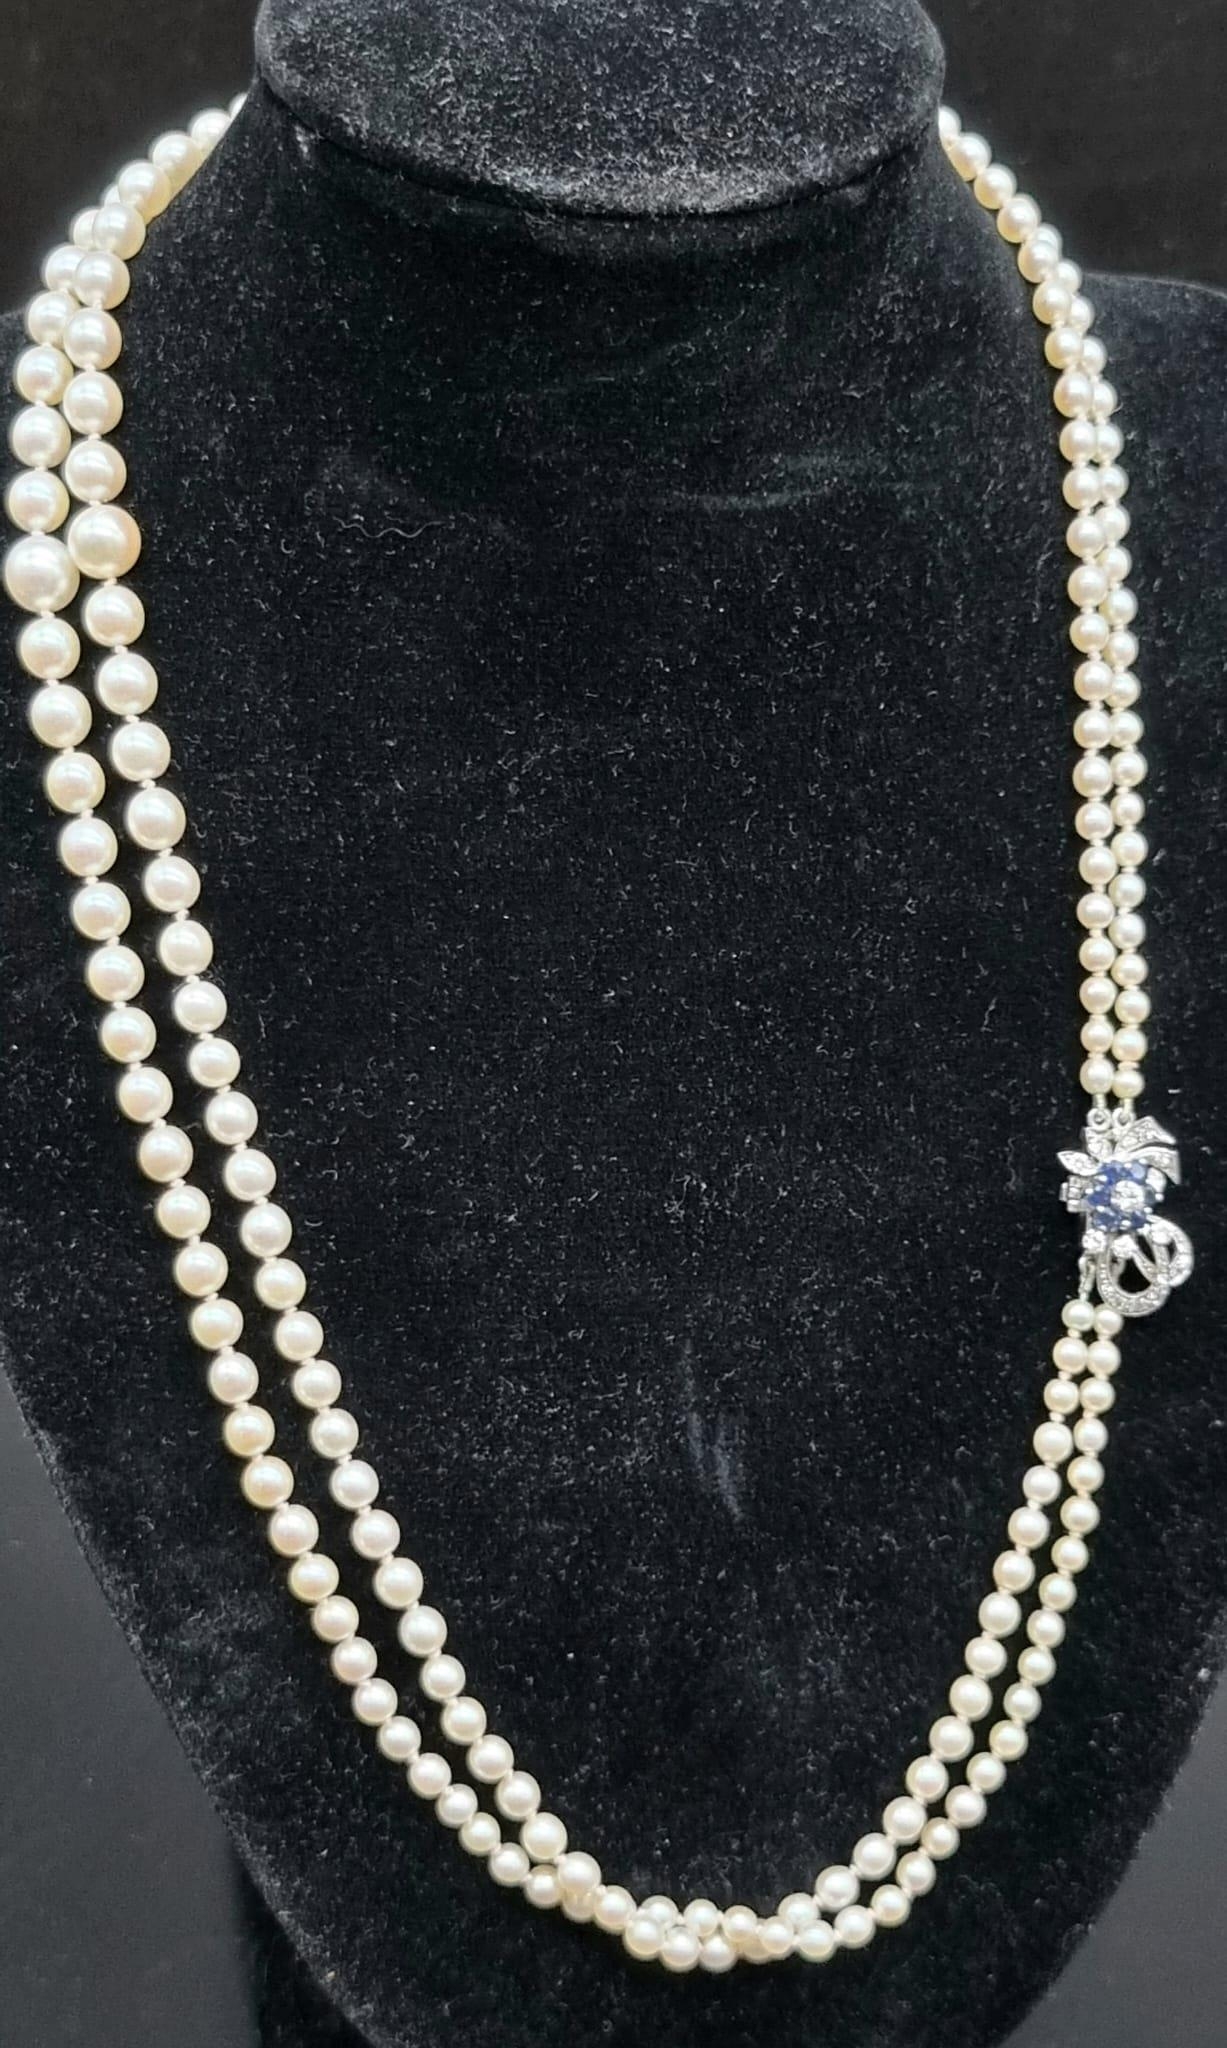 An Akoya (possibly natural) Double Strand Graduated Pearl Necklace with an 18K White Gold Diamond - Image 2 of 5